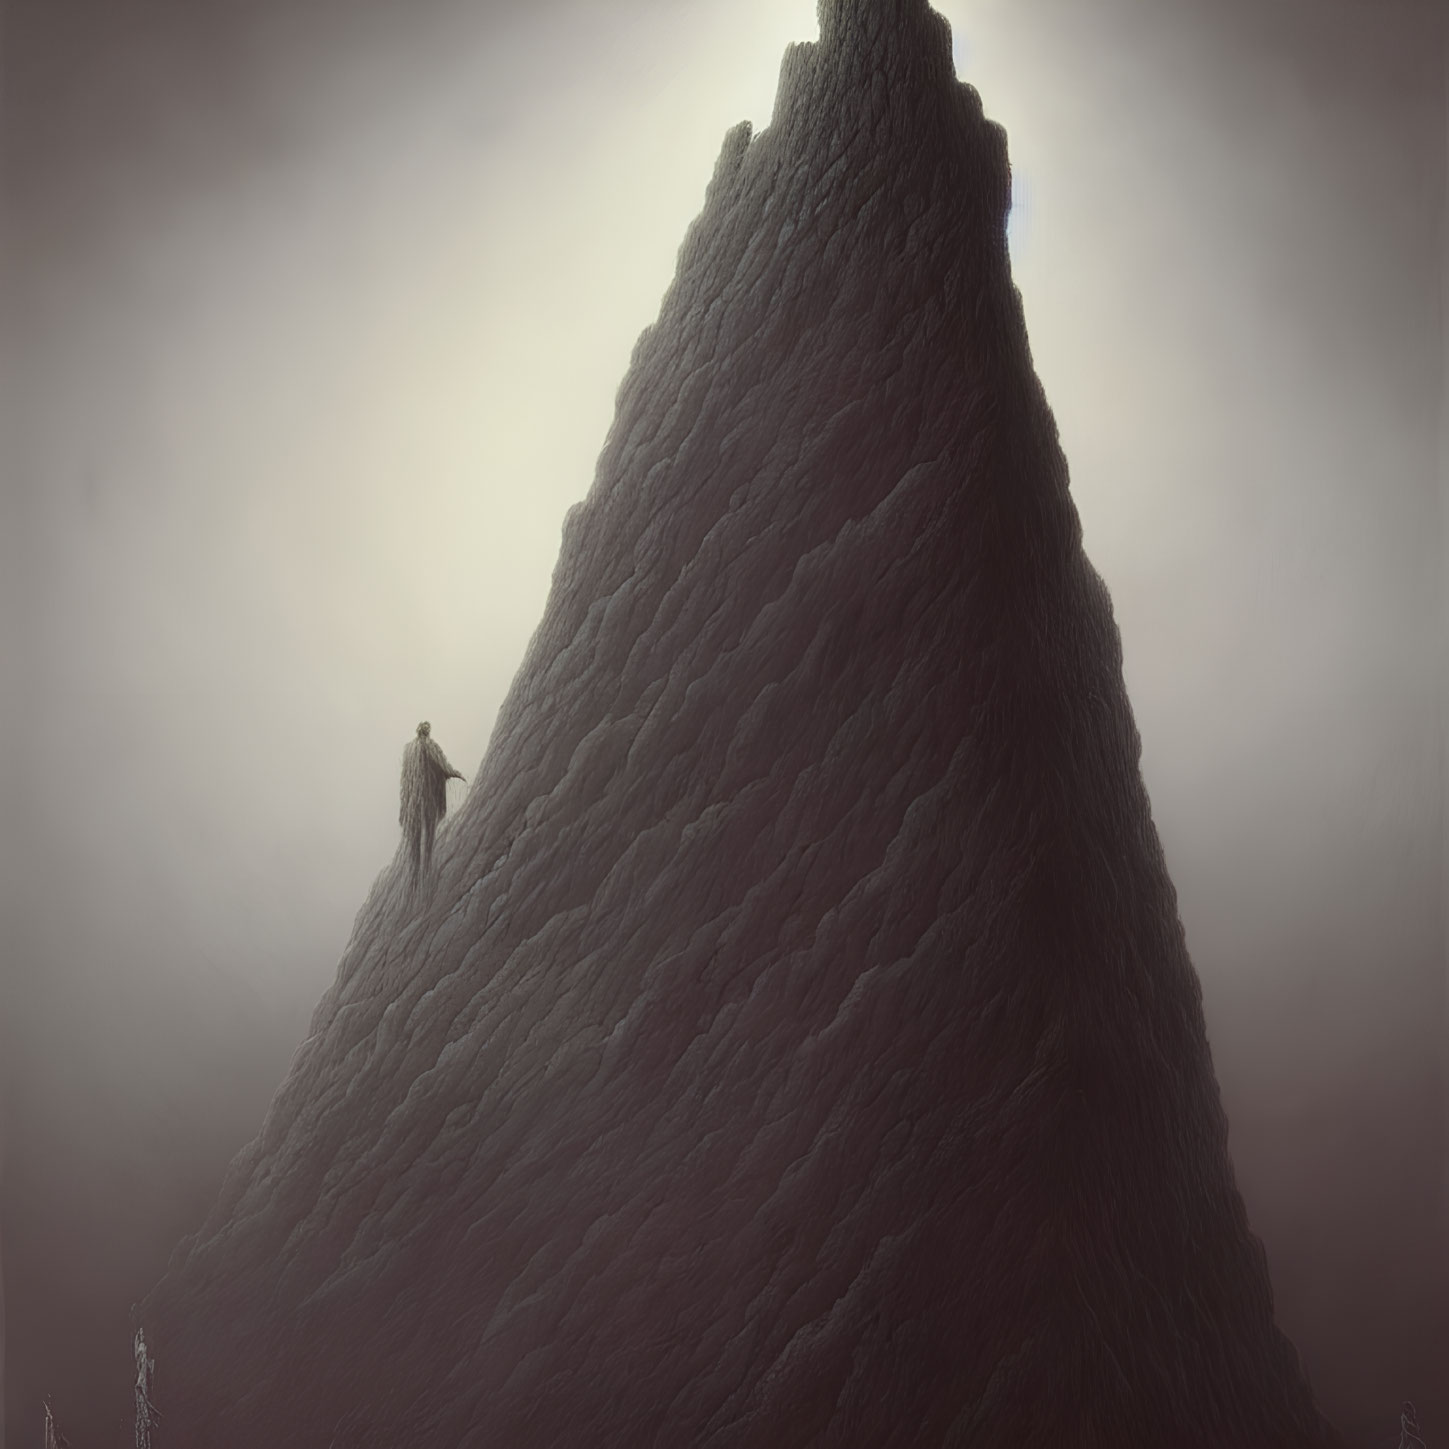 Mysterious figure in front of tall, textured spire in foggy landscape